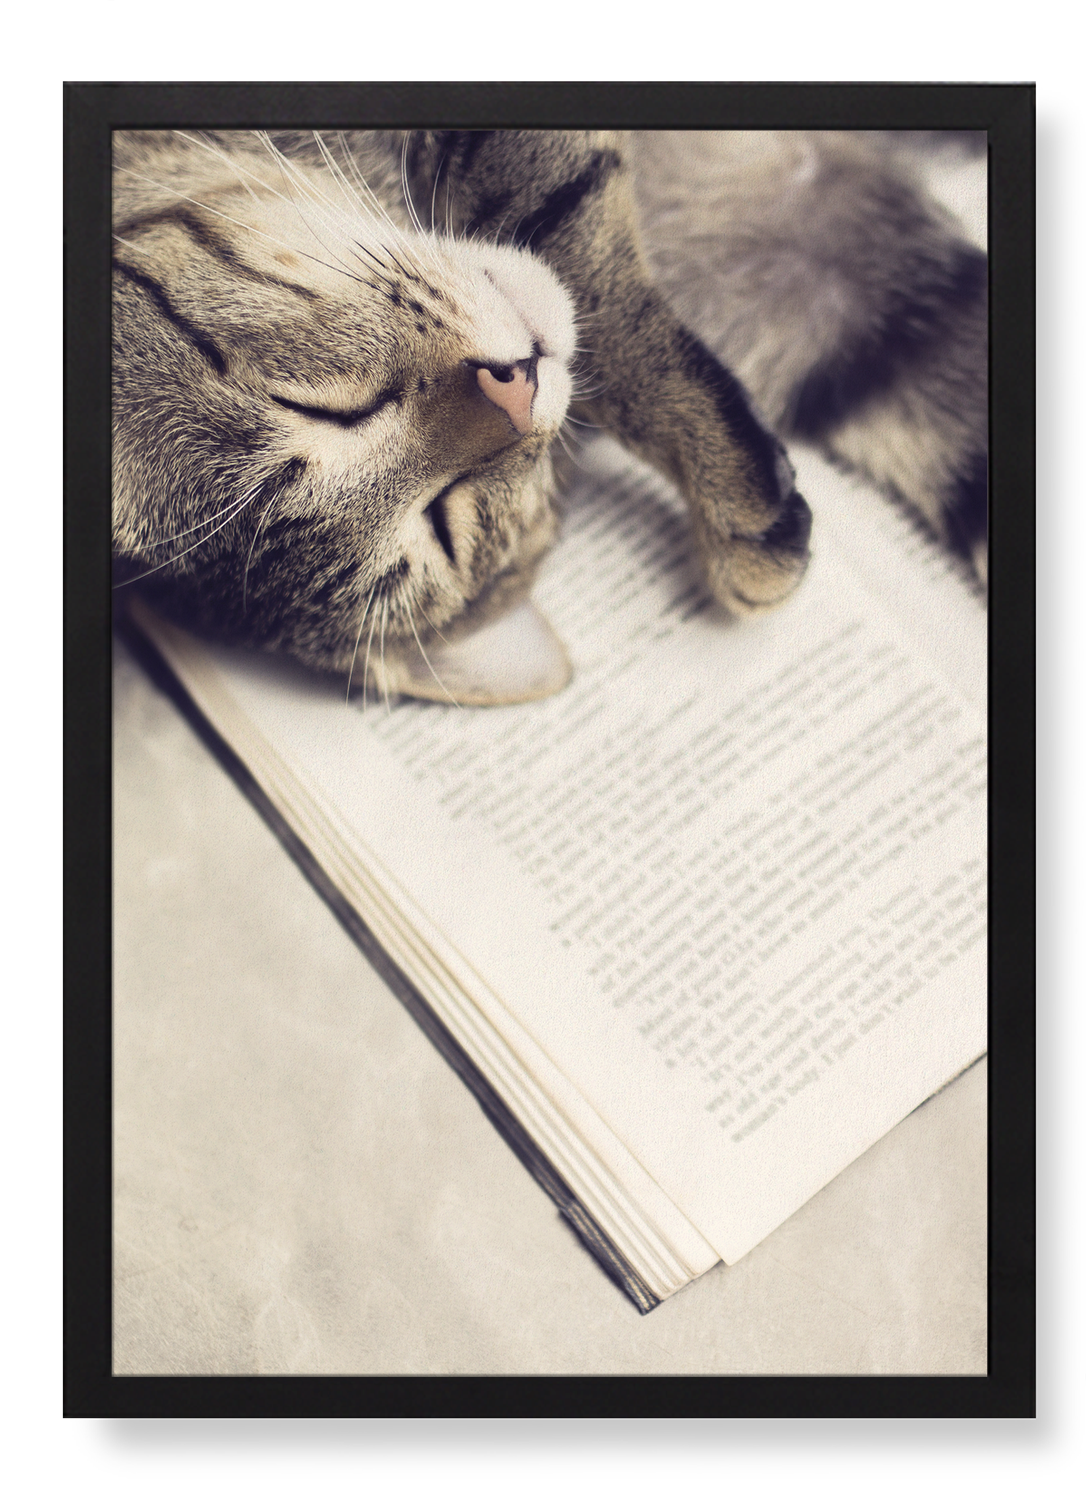 CAT AND BOOK